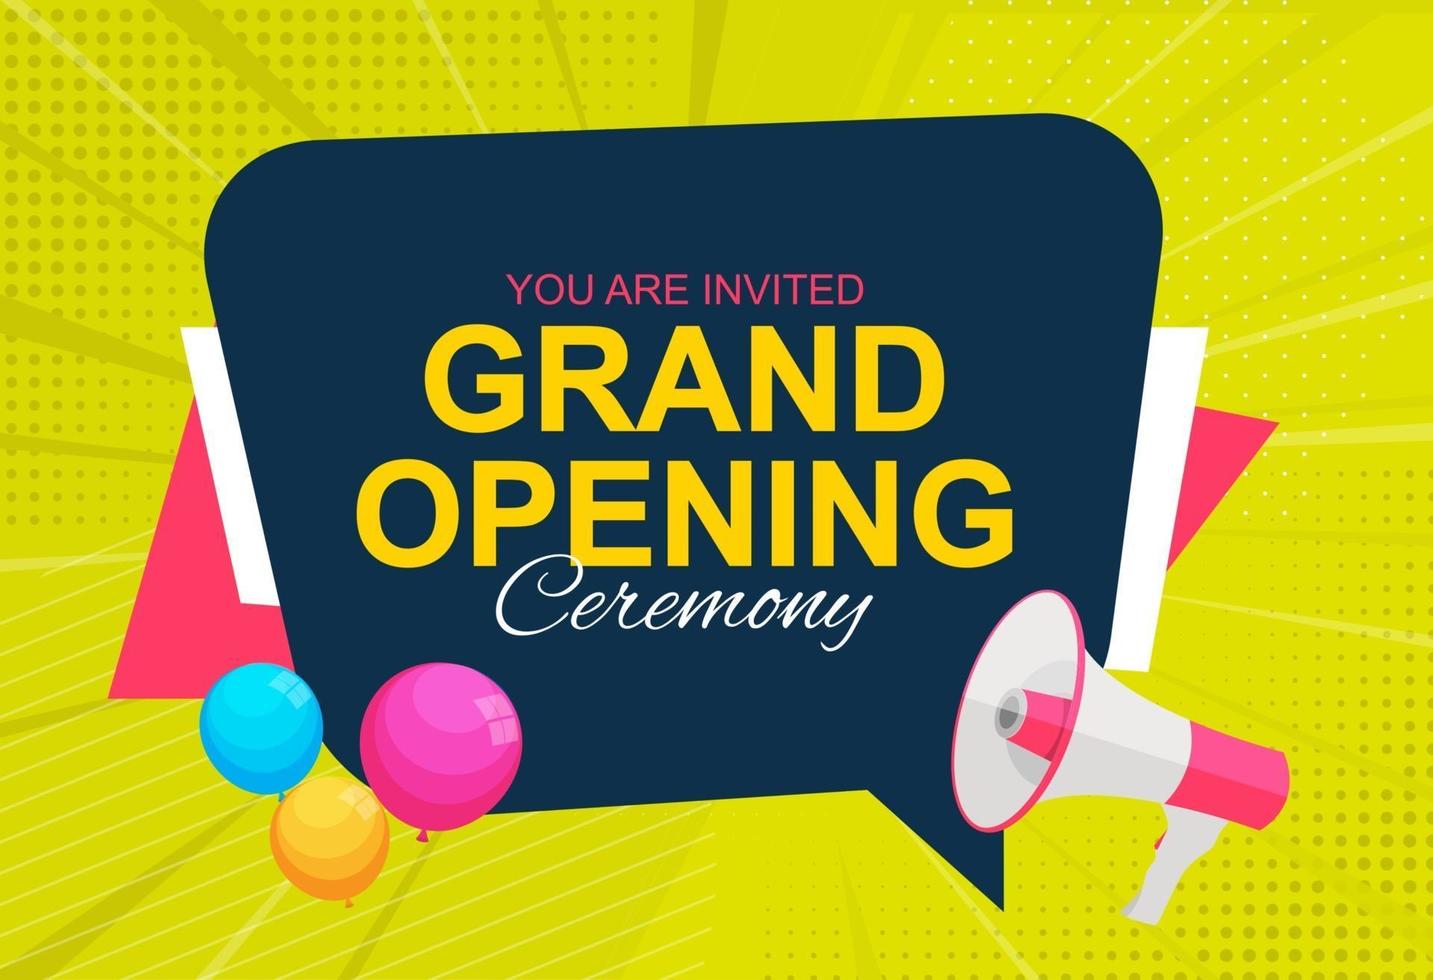 Grand Opening Card with Megaphone and Speech Bubble. Vector Illustration